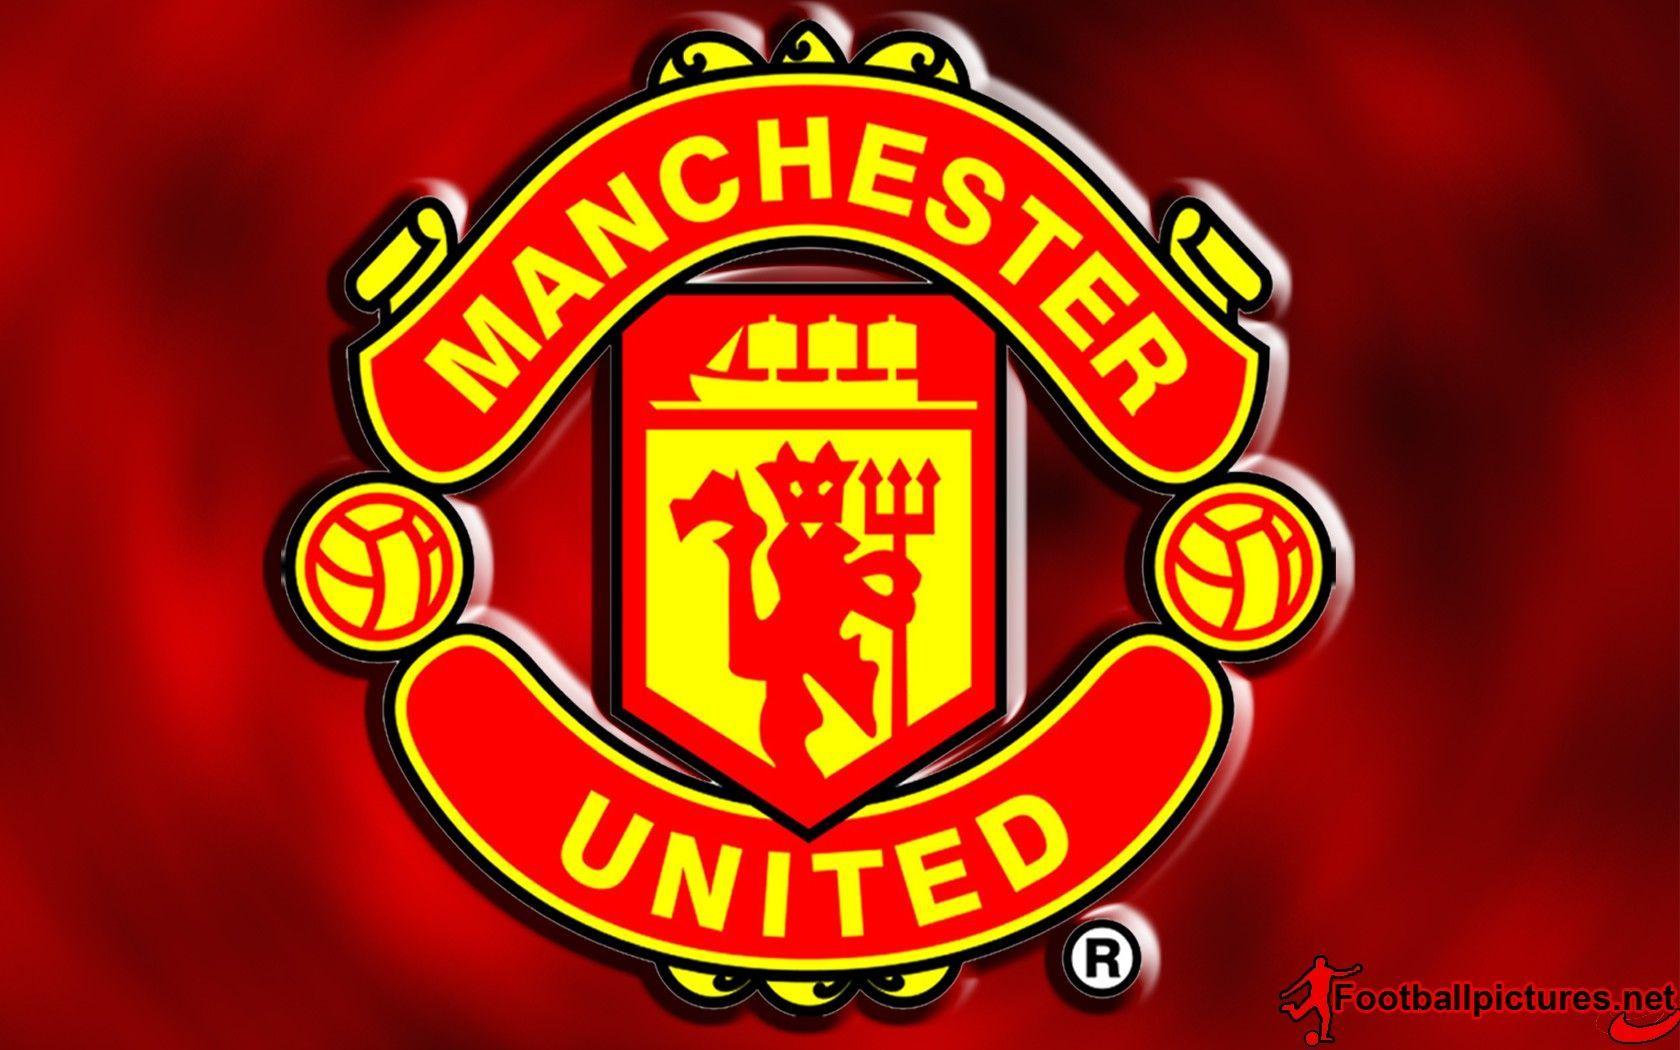 man utd logo wide screen wallpaper, Football Picture and Photo